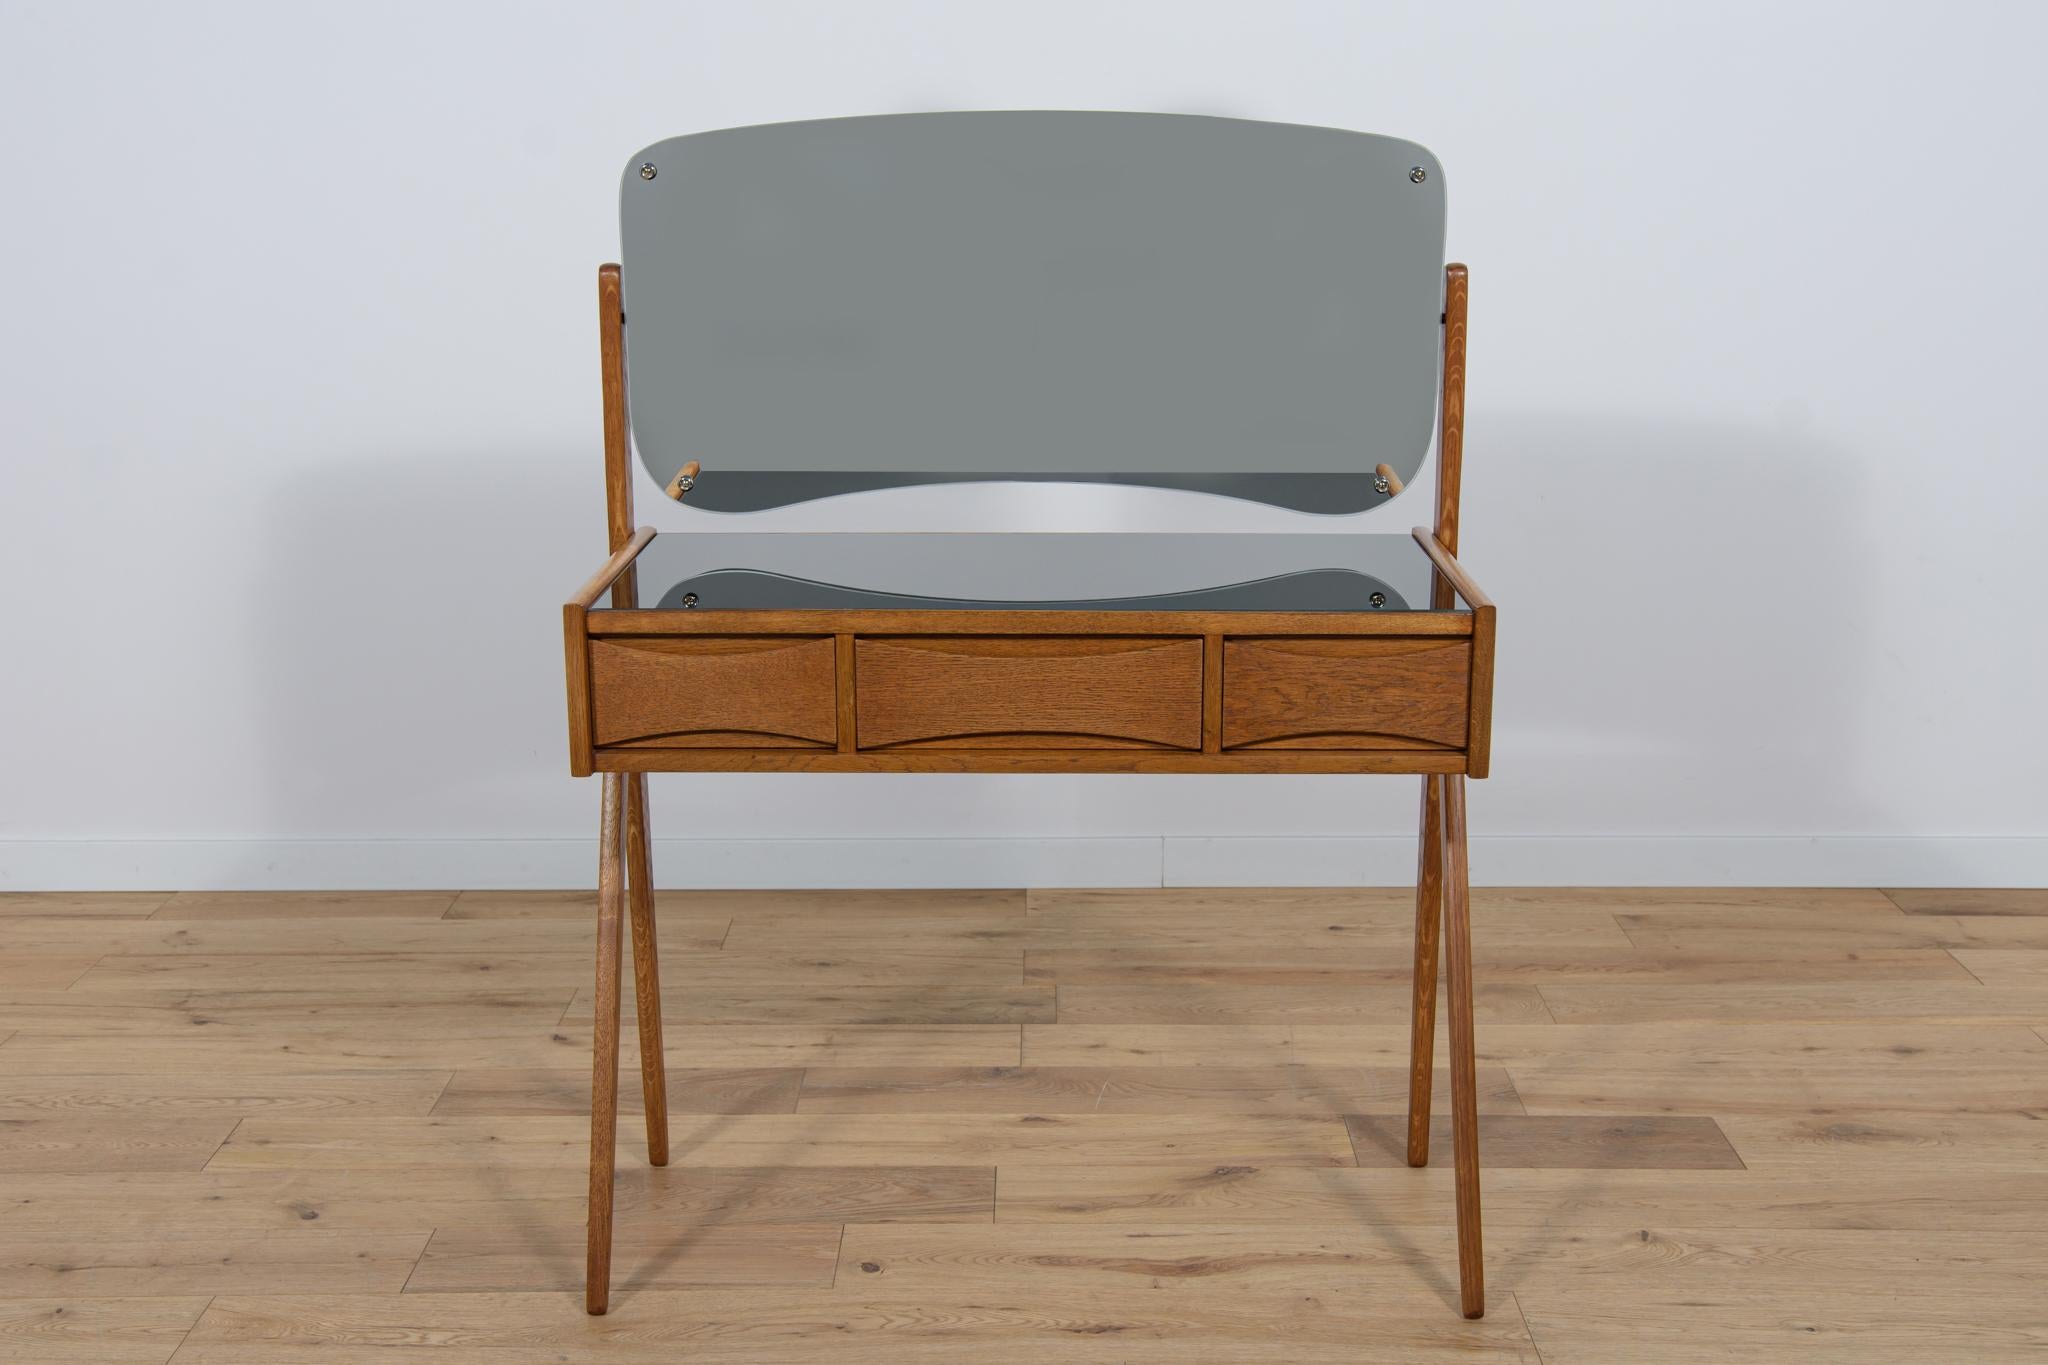 A small teak dressing table designed by Arne Vodder for Ølholm Møbelfabrik. The dressing table has three drawers. There is an adjustable mirror in the frame above the dressing table. The furniture has been completely renovated, it has been cleaned